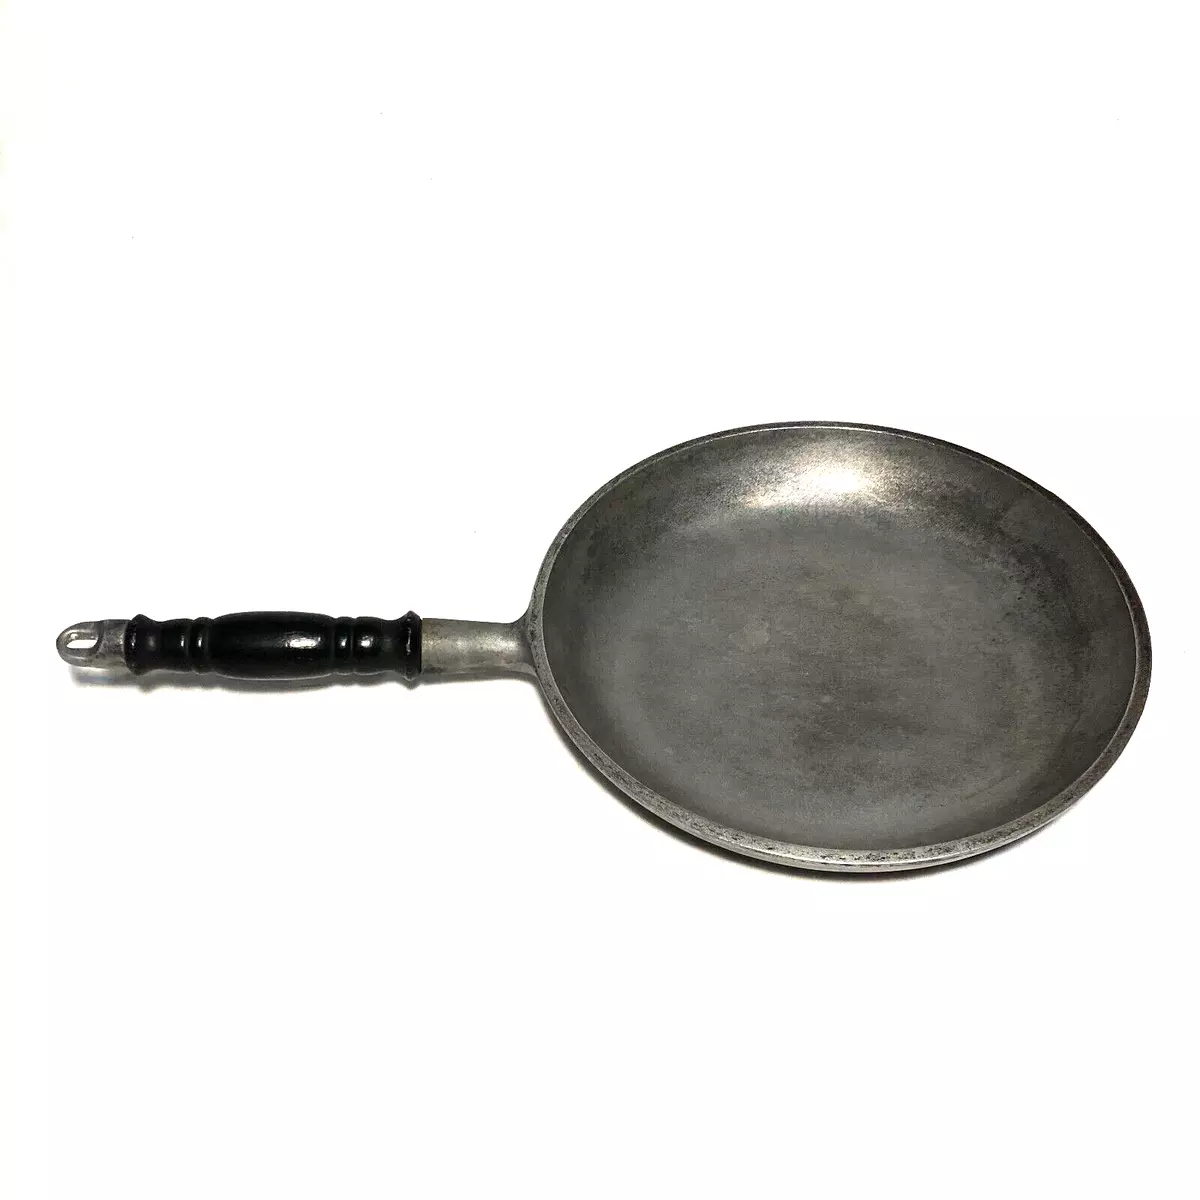 Rare Vintage The French Chef Omelette Pan By The Pot Shop Boston 10.5”  Aluminum